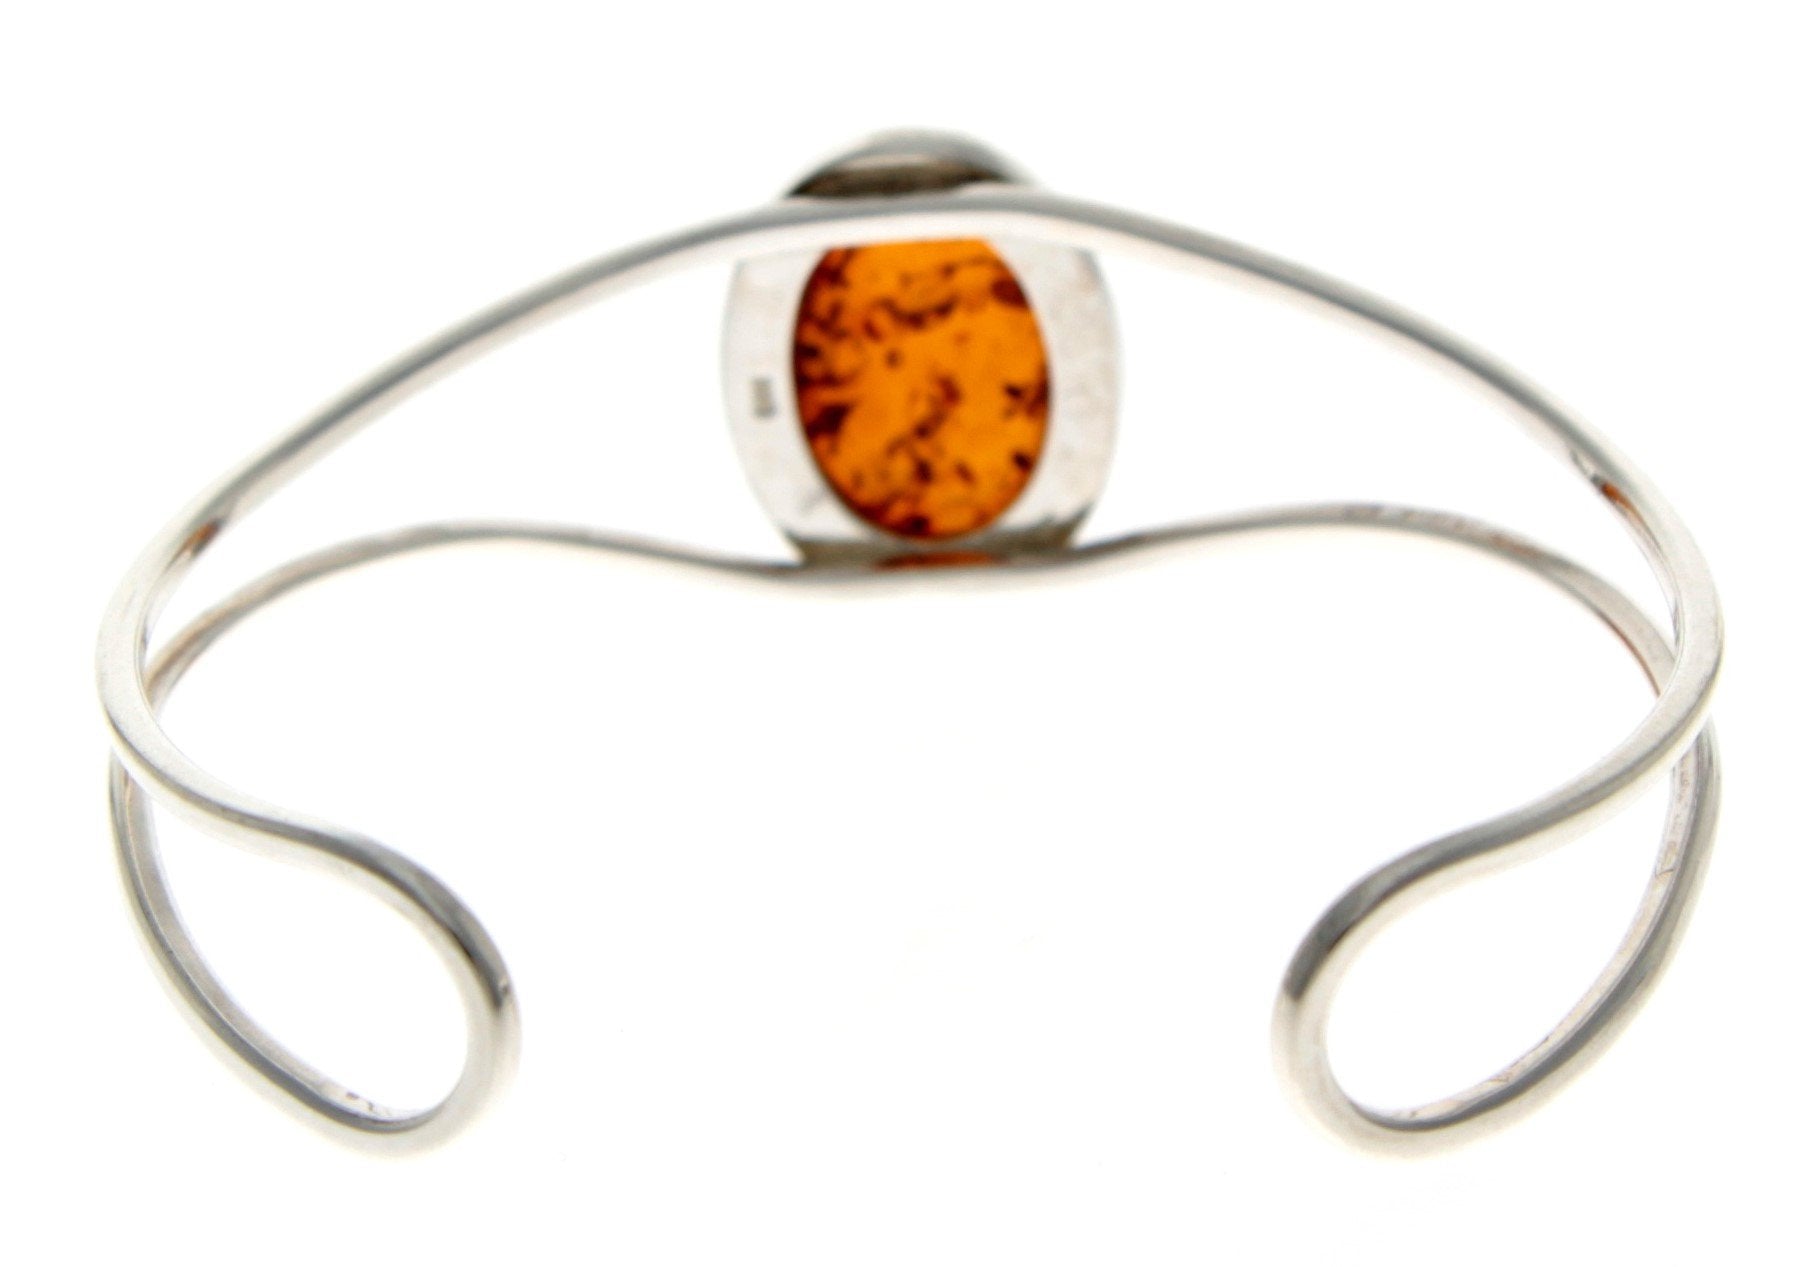 Beautiful Designer Adjustable Silver Bangle with oval Baltic Amber Cabochon - GL532